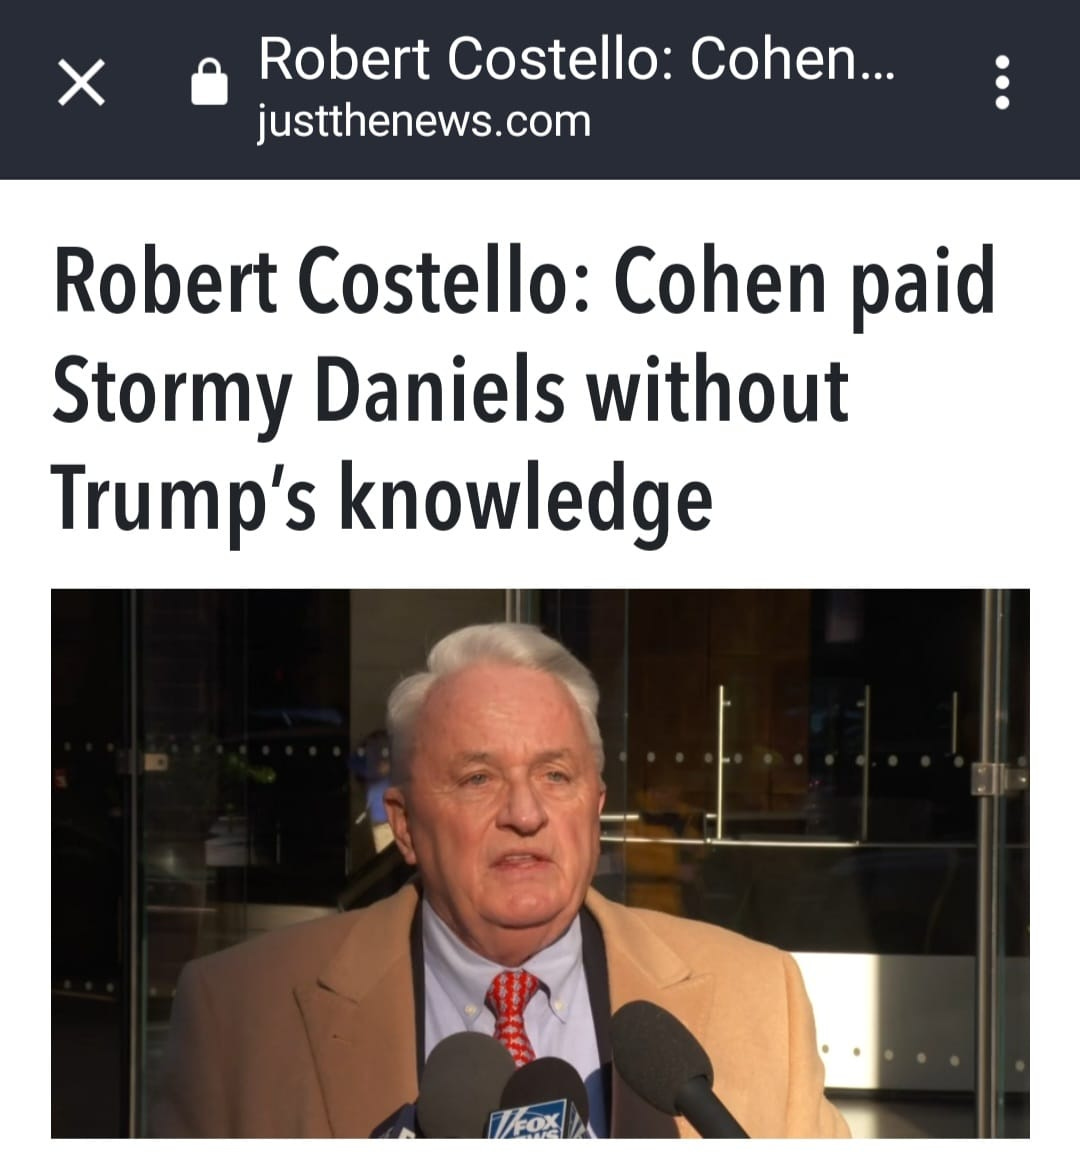 May be an image of 1 person and text that says 'Robert Costello: Cohen... justthenews.com Robert Costello: Cohen paid Stormy Daniels without Trump's knowledge ΠOX'